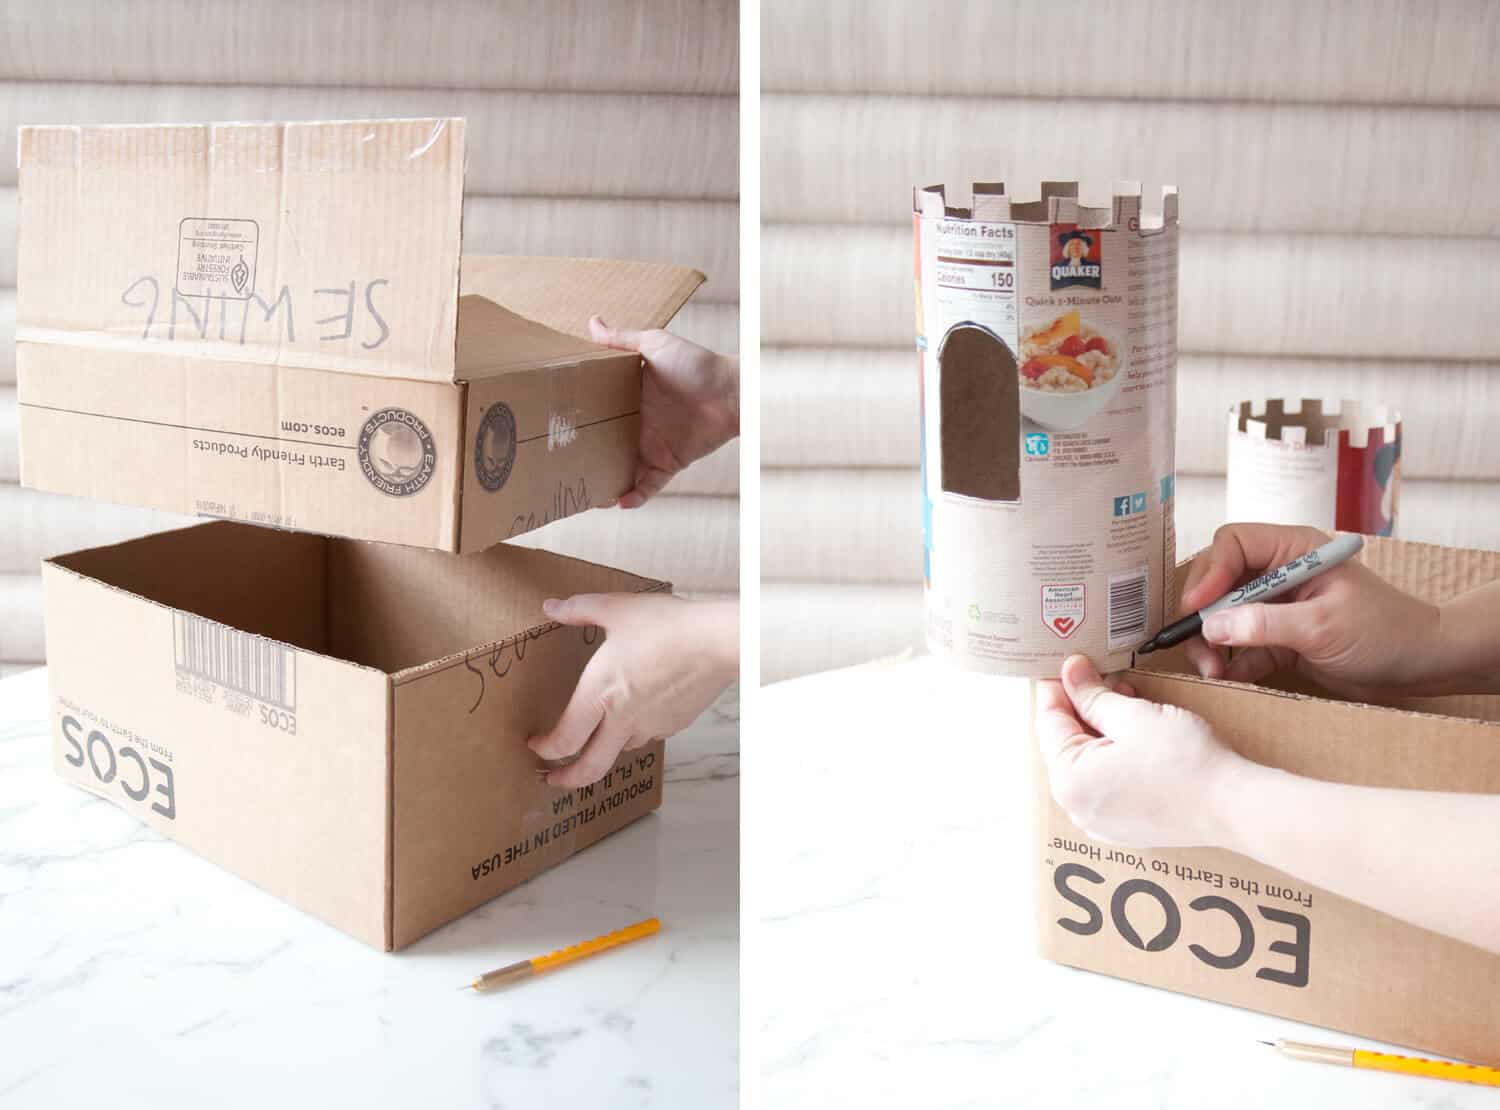 upcycled cardboard castle